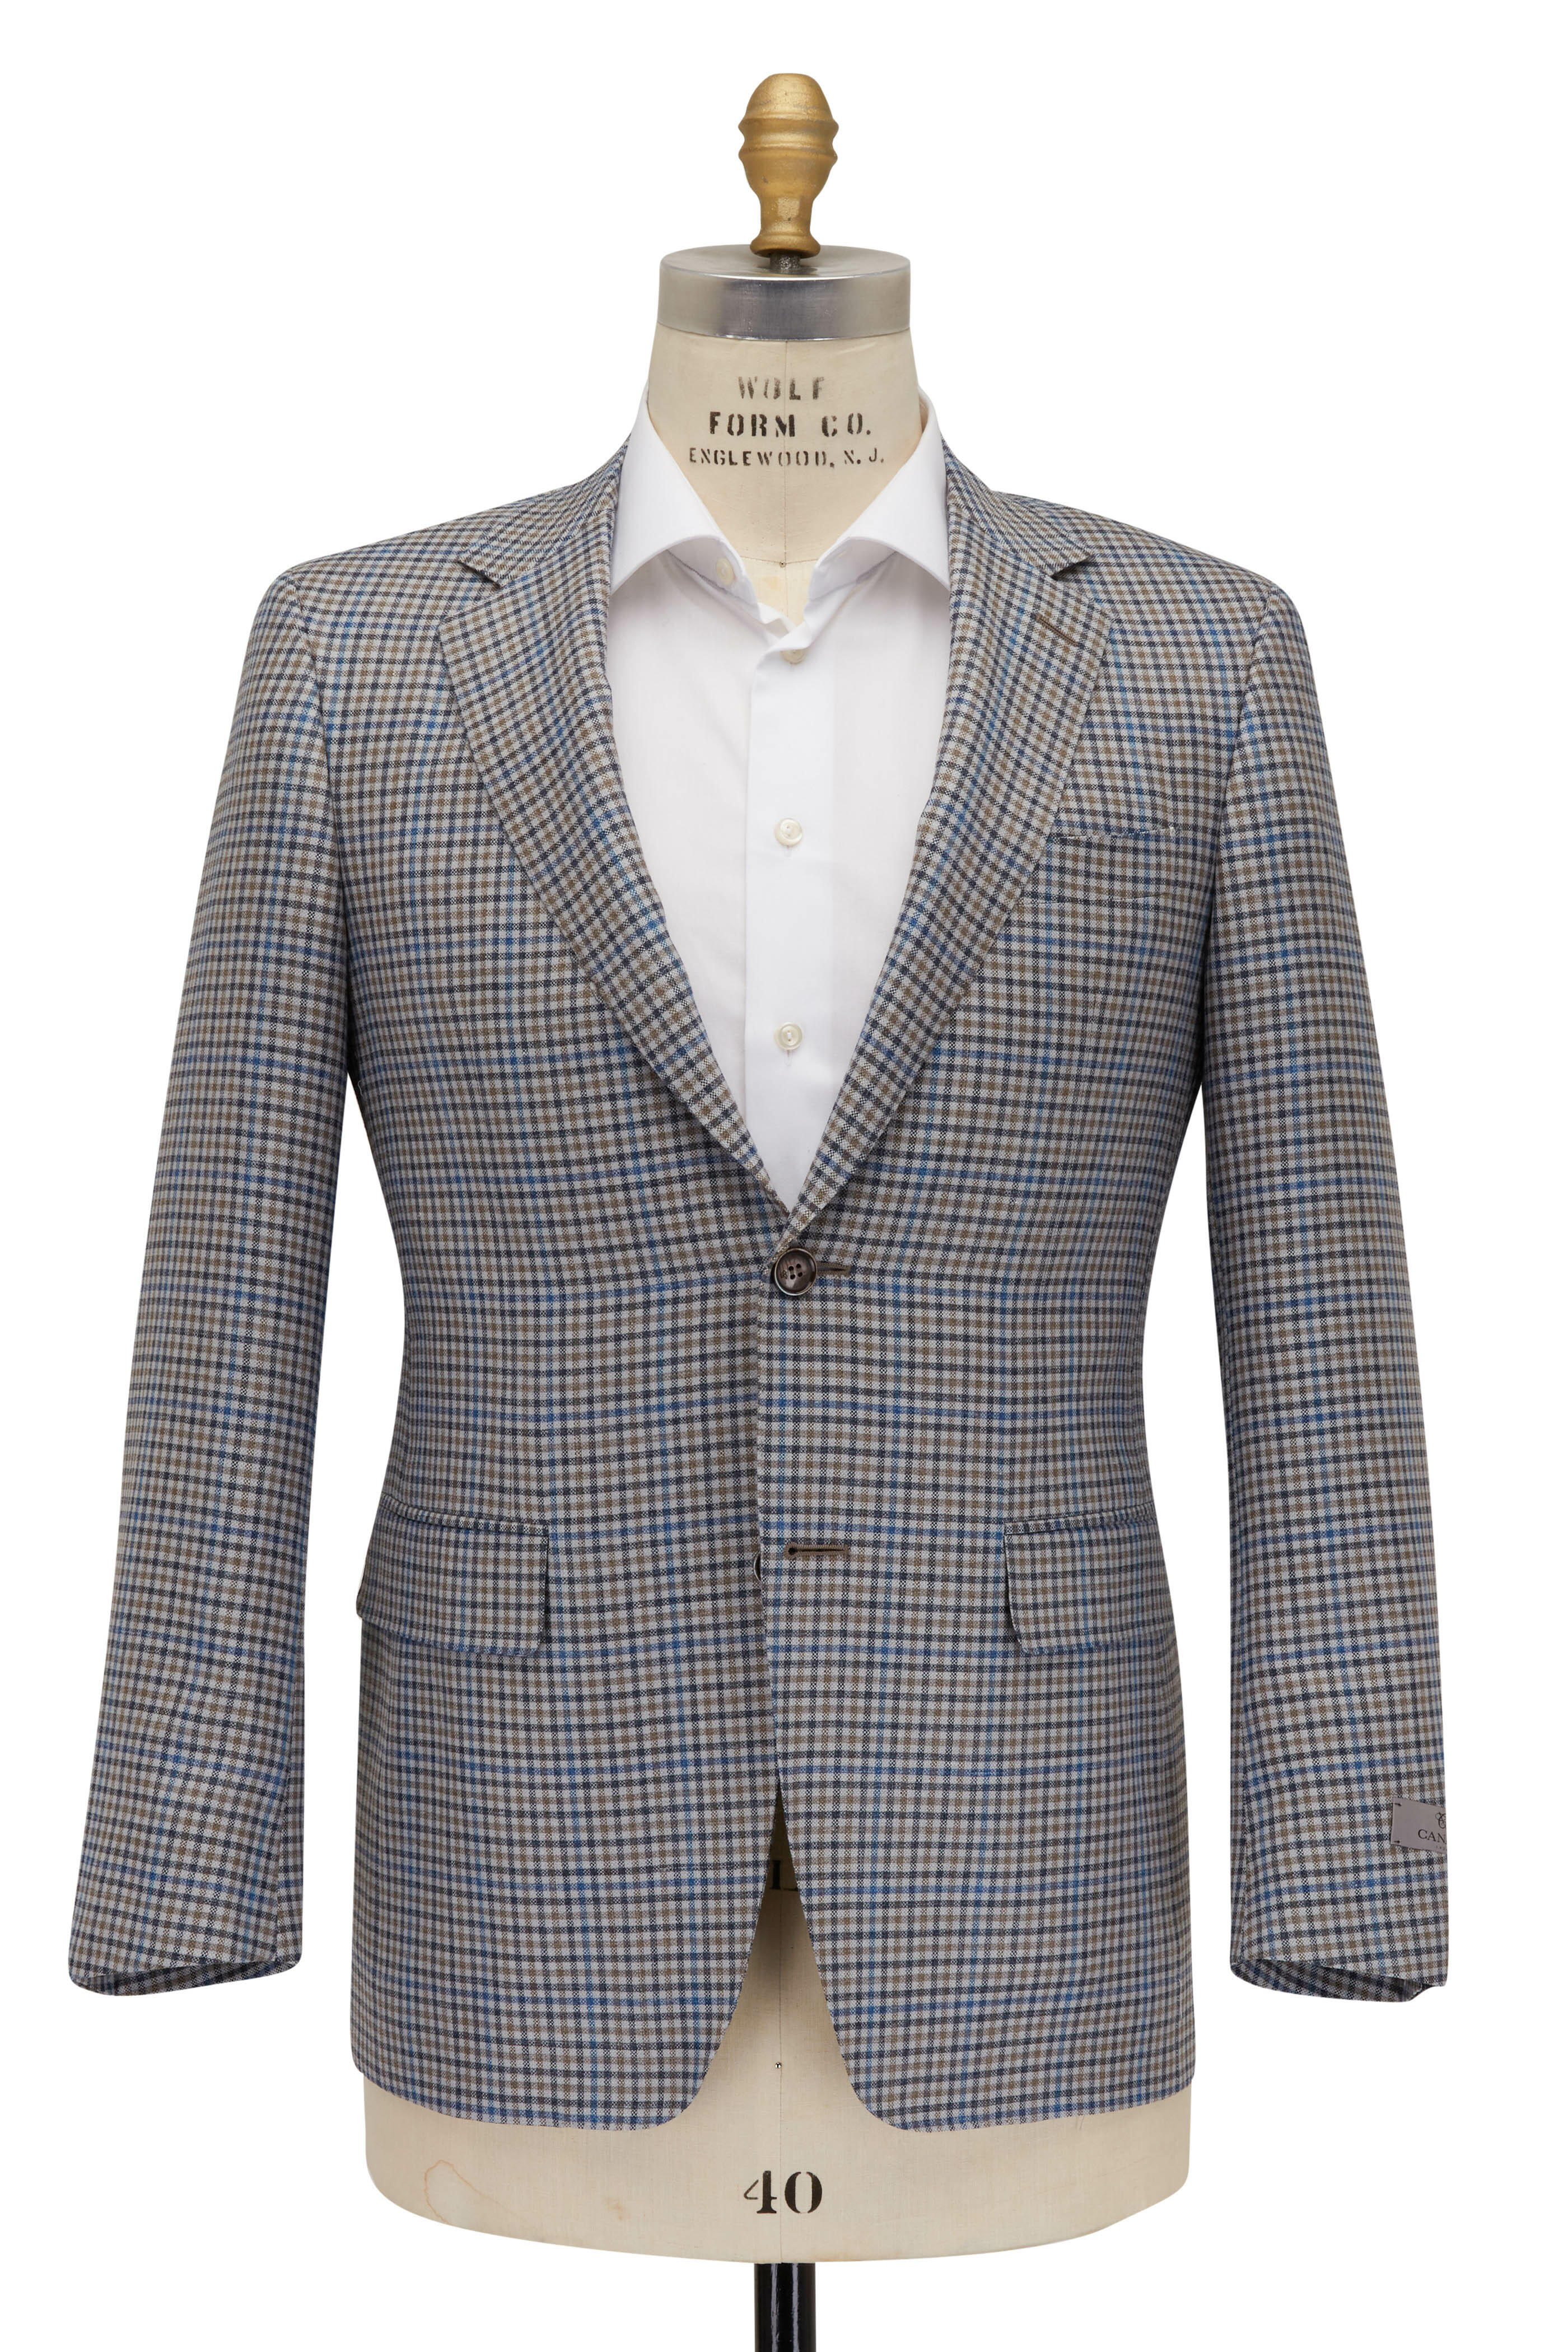 Canali - Tan & Blue Vintage Check Sportcoat | Mitchell Stores